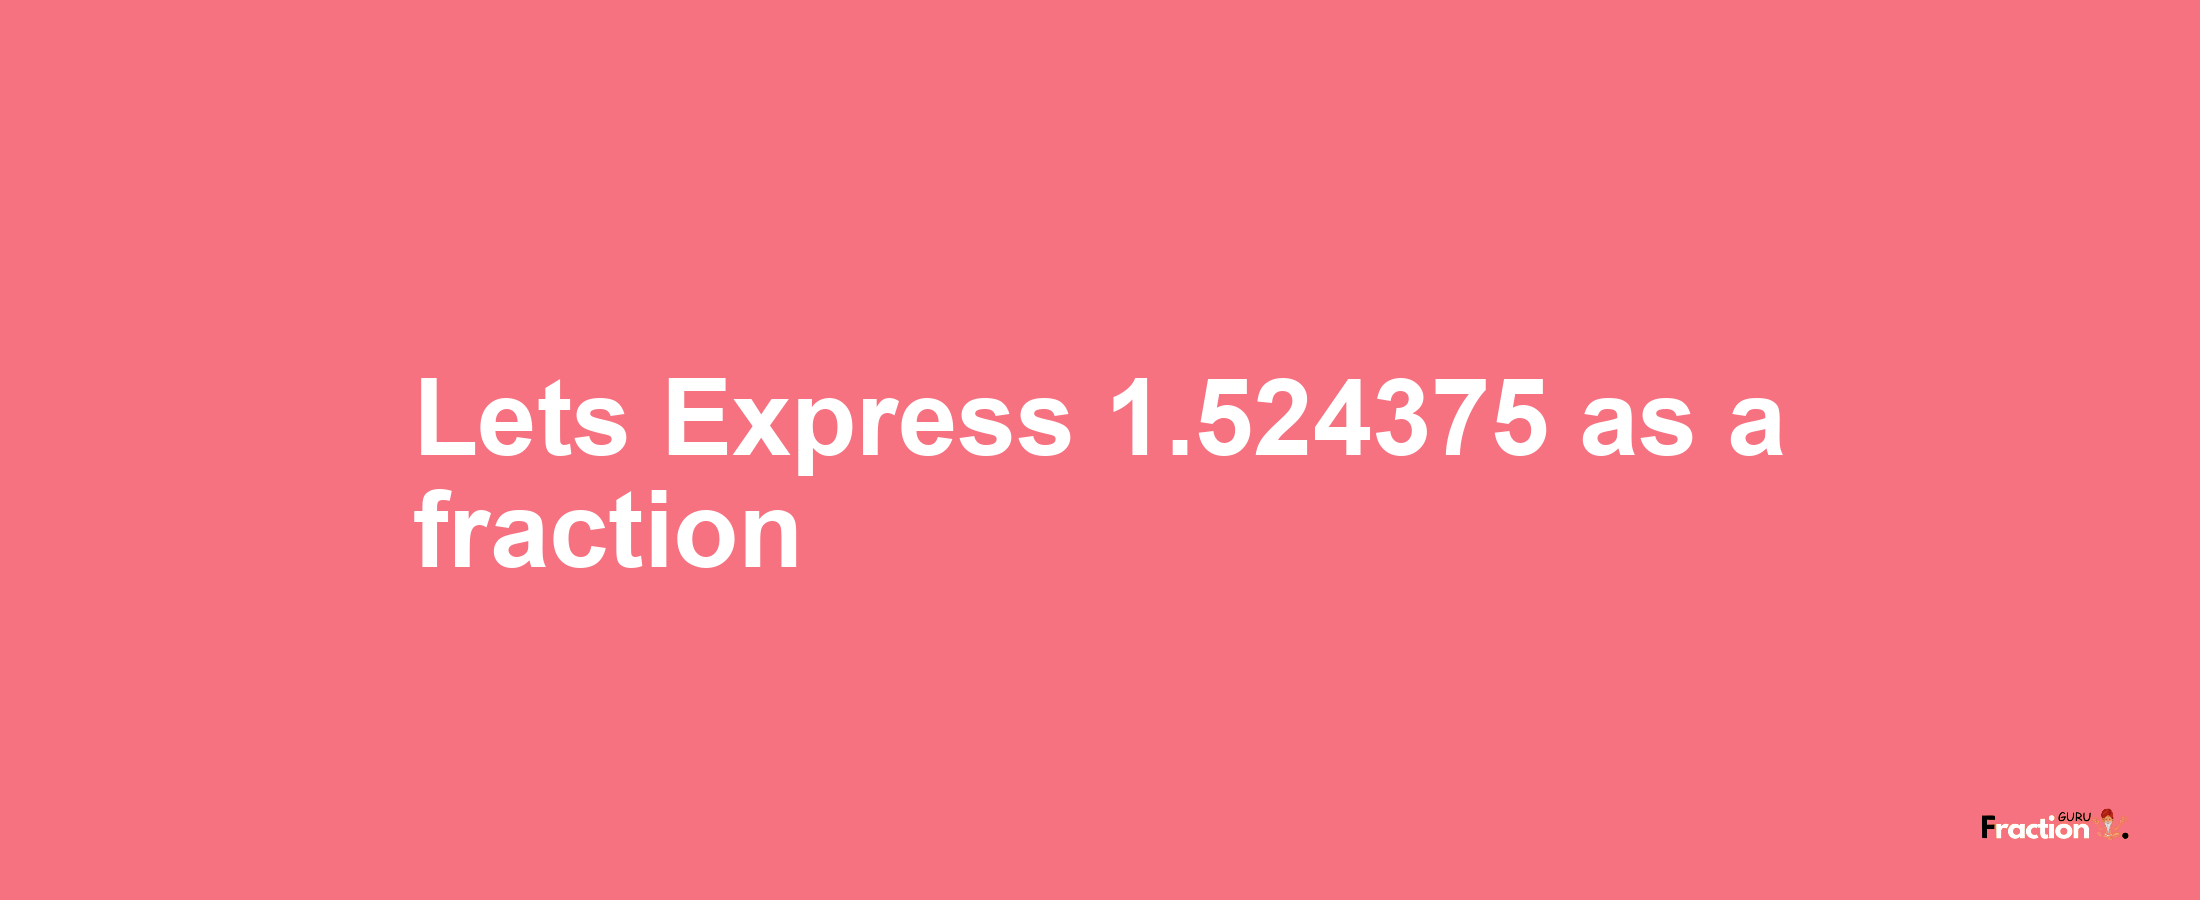 Lets Express 1.524375 as afraction